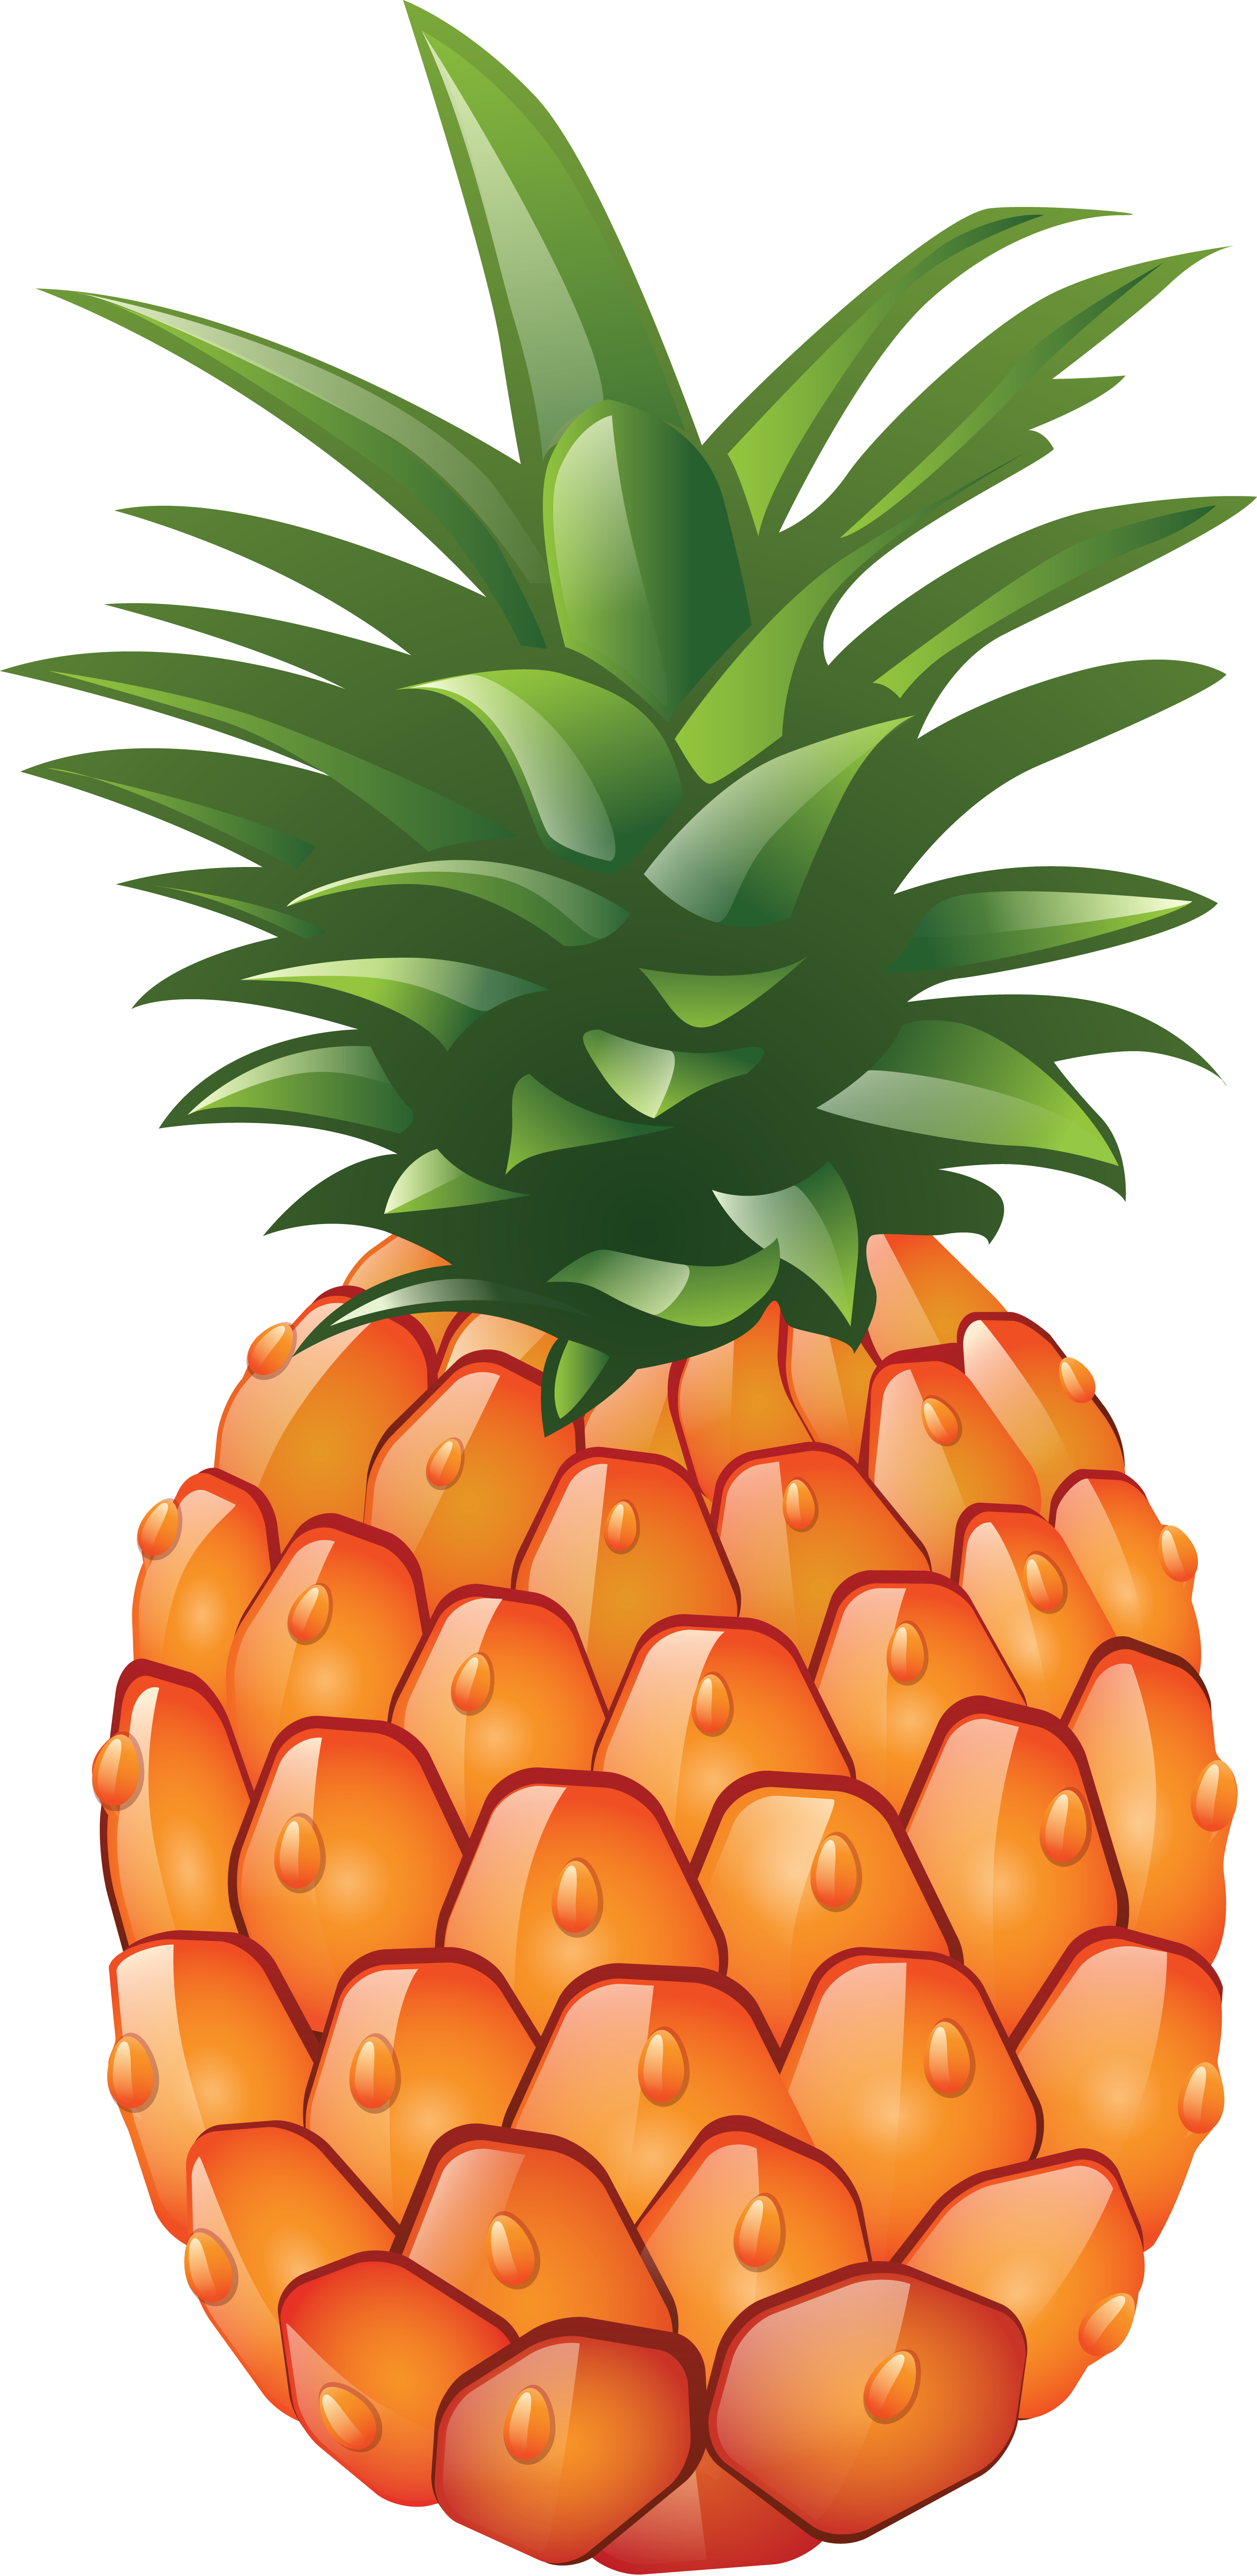 Png image free download. Clipart summer pineapple